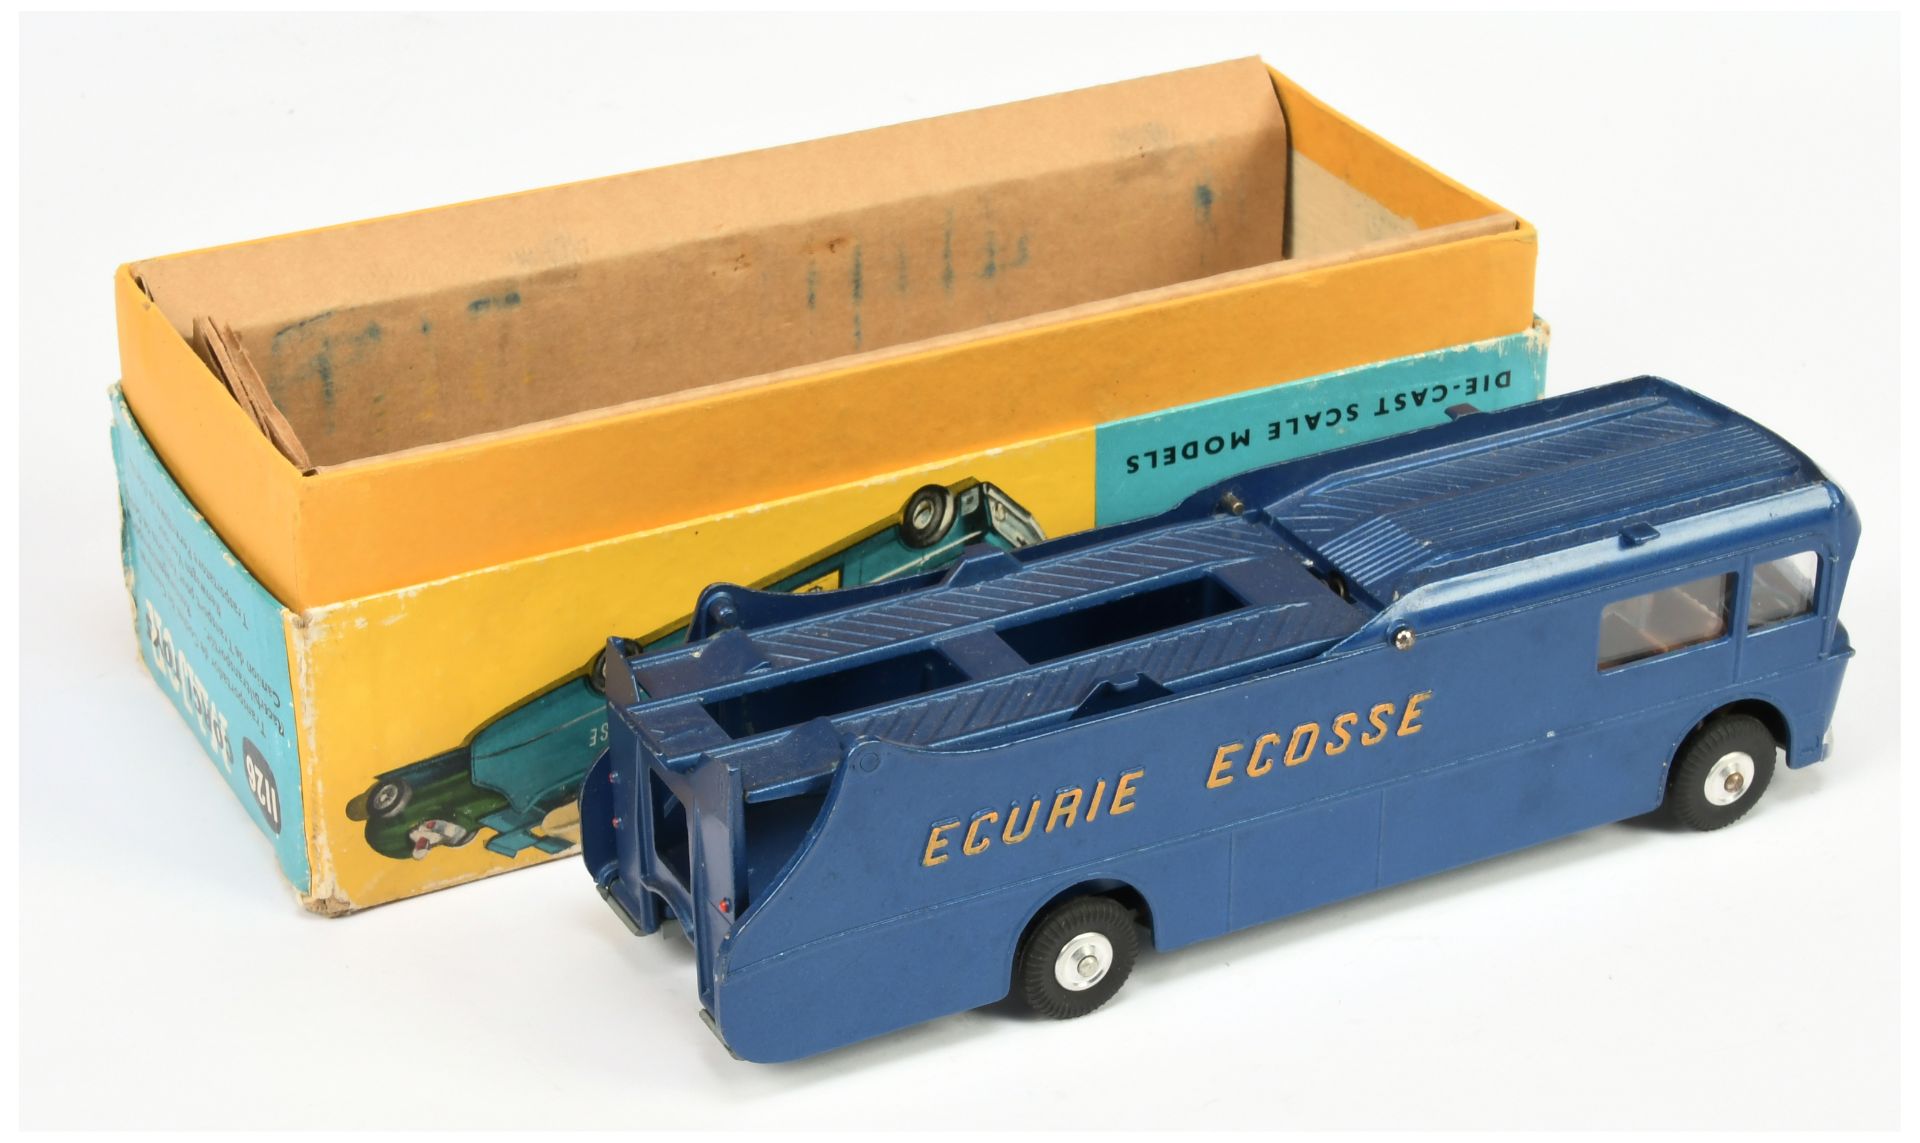 Corgi Toys 1126 Ecurie Ecosse Racing Car Transporter - Blue body with yellow lettering, brown int... - Image 2 of 2